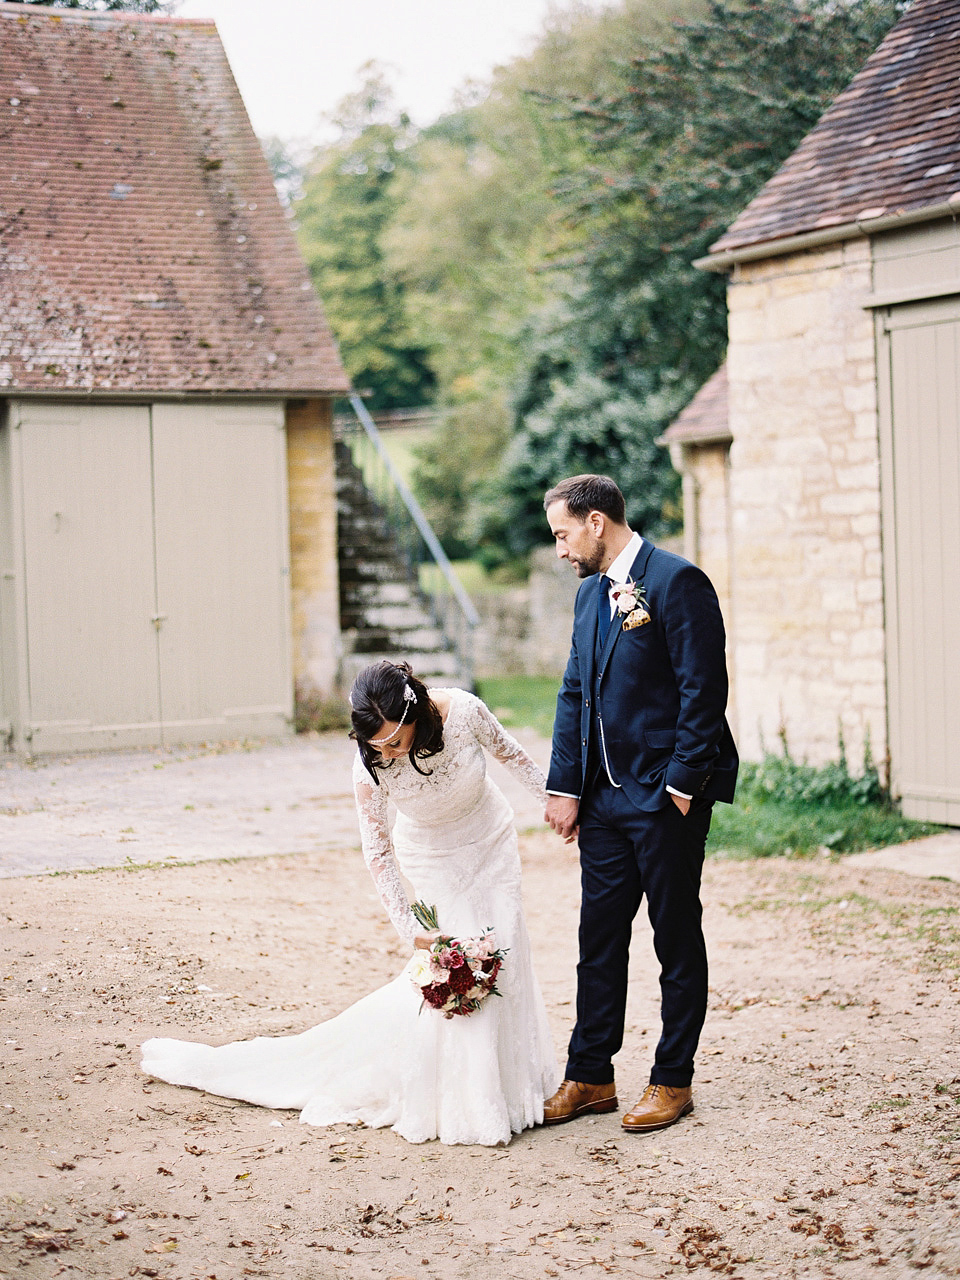 An elegant and quintessentially English village hall wedding in the Cotswolds. Bride Claire wore Ellis Bridals. Photography by David Jenkins.